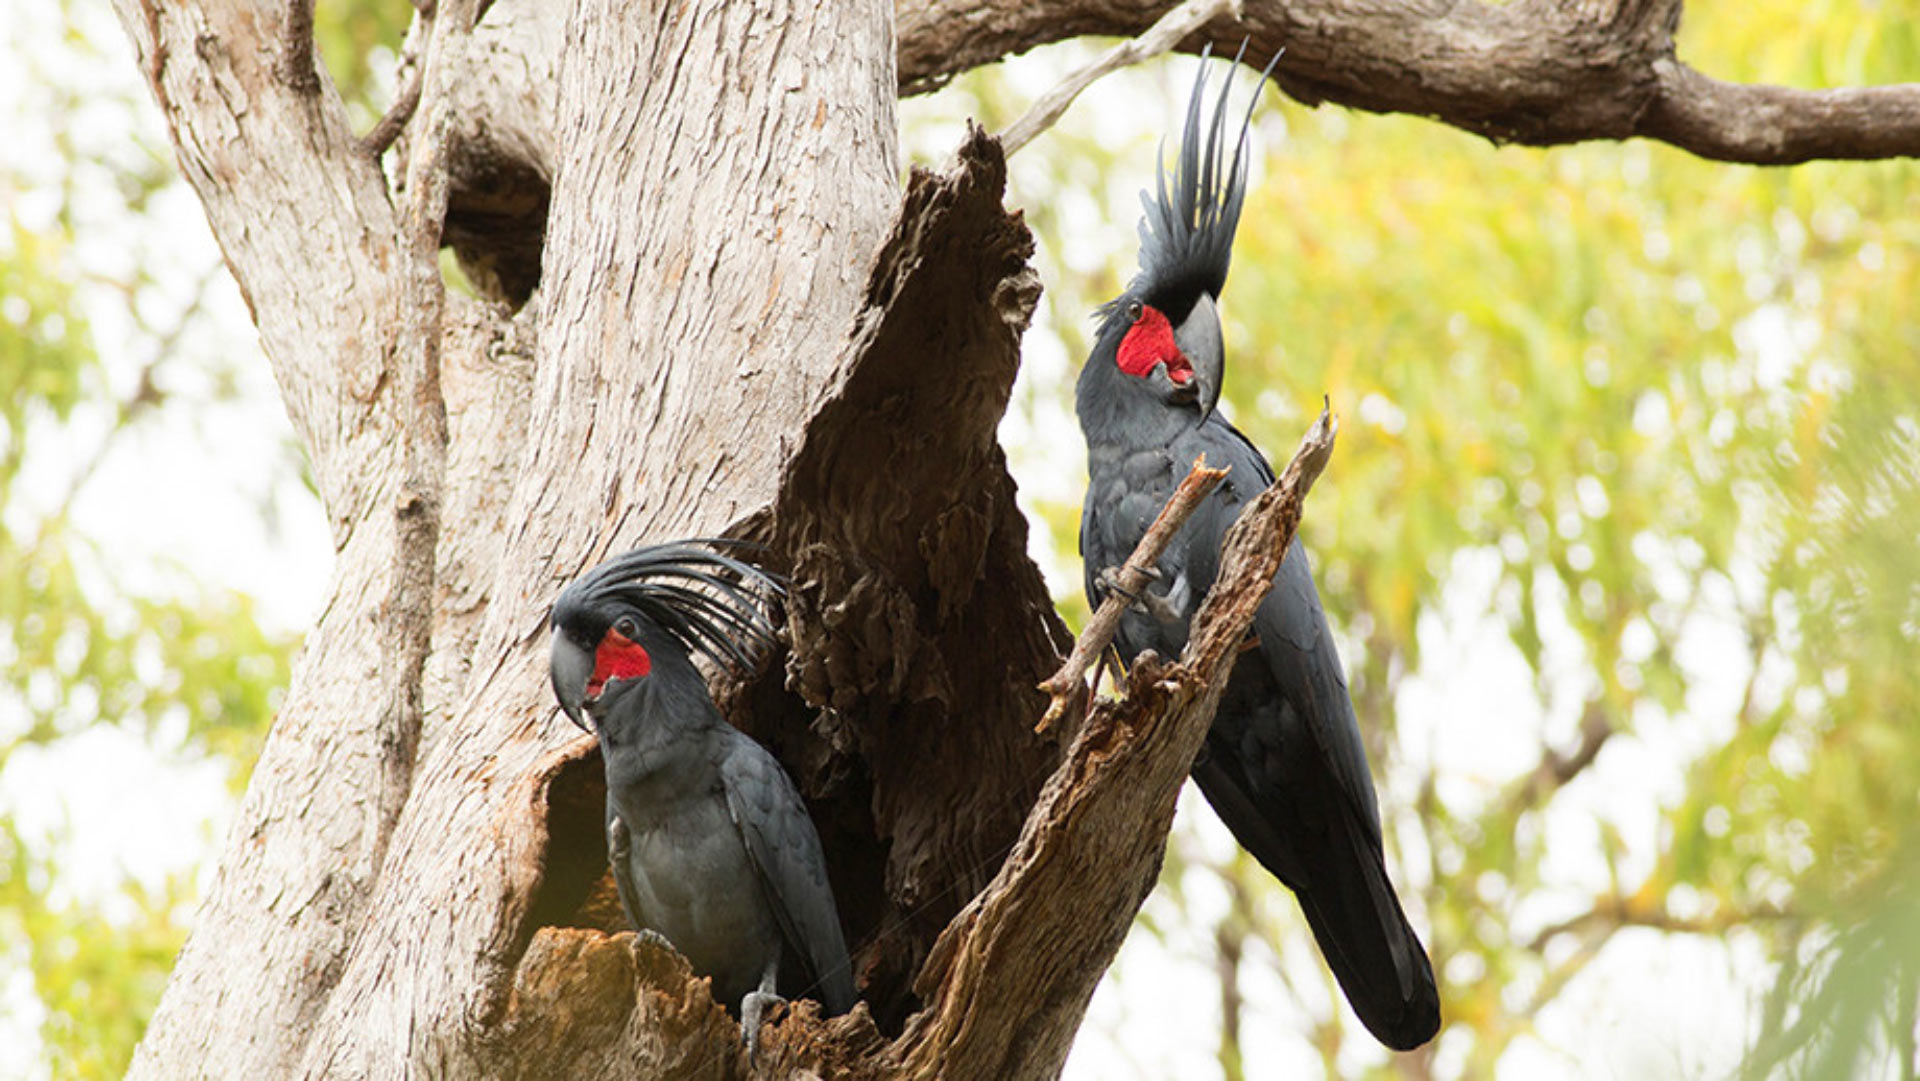 Male Palm Cockatoos Play Drums to Attract Mates | Biology | Sci-News.com